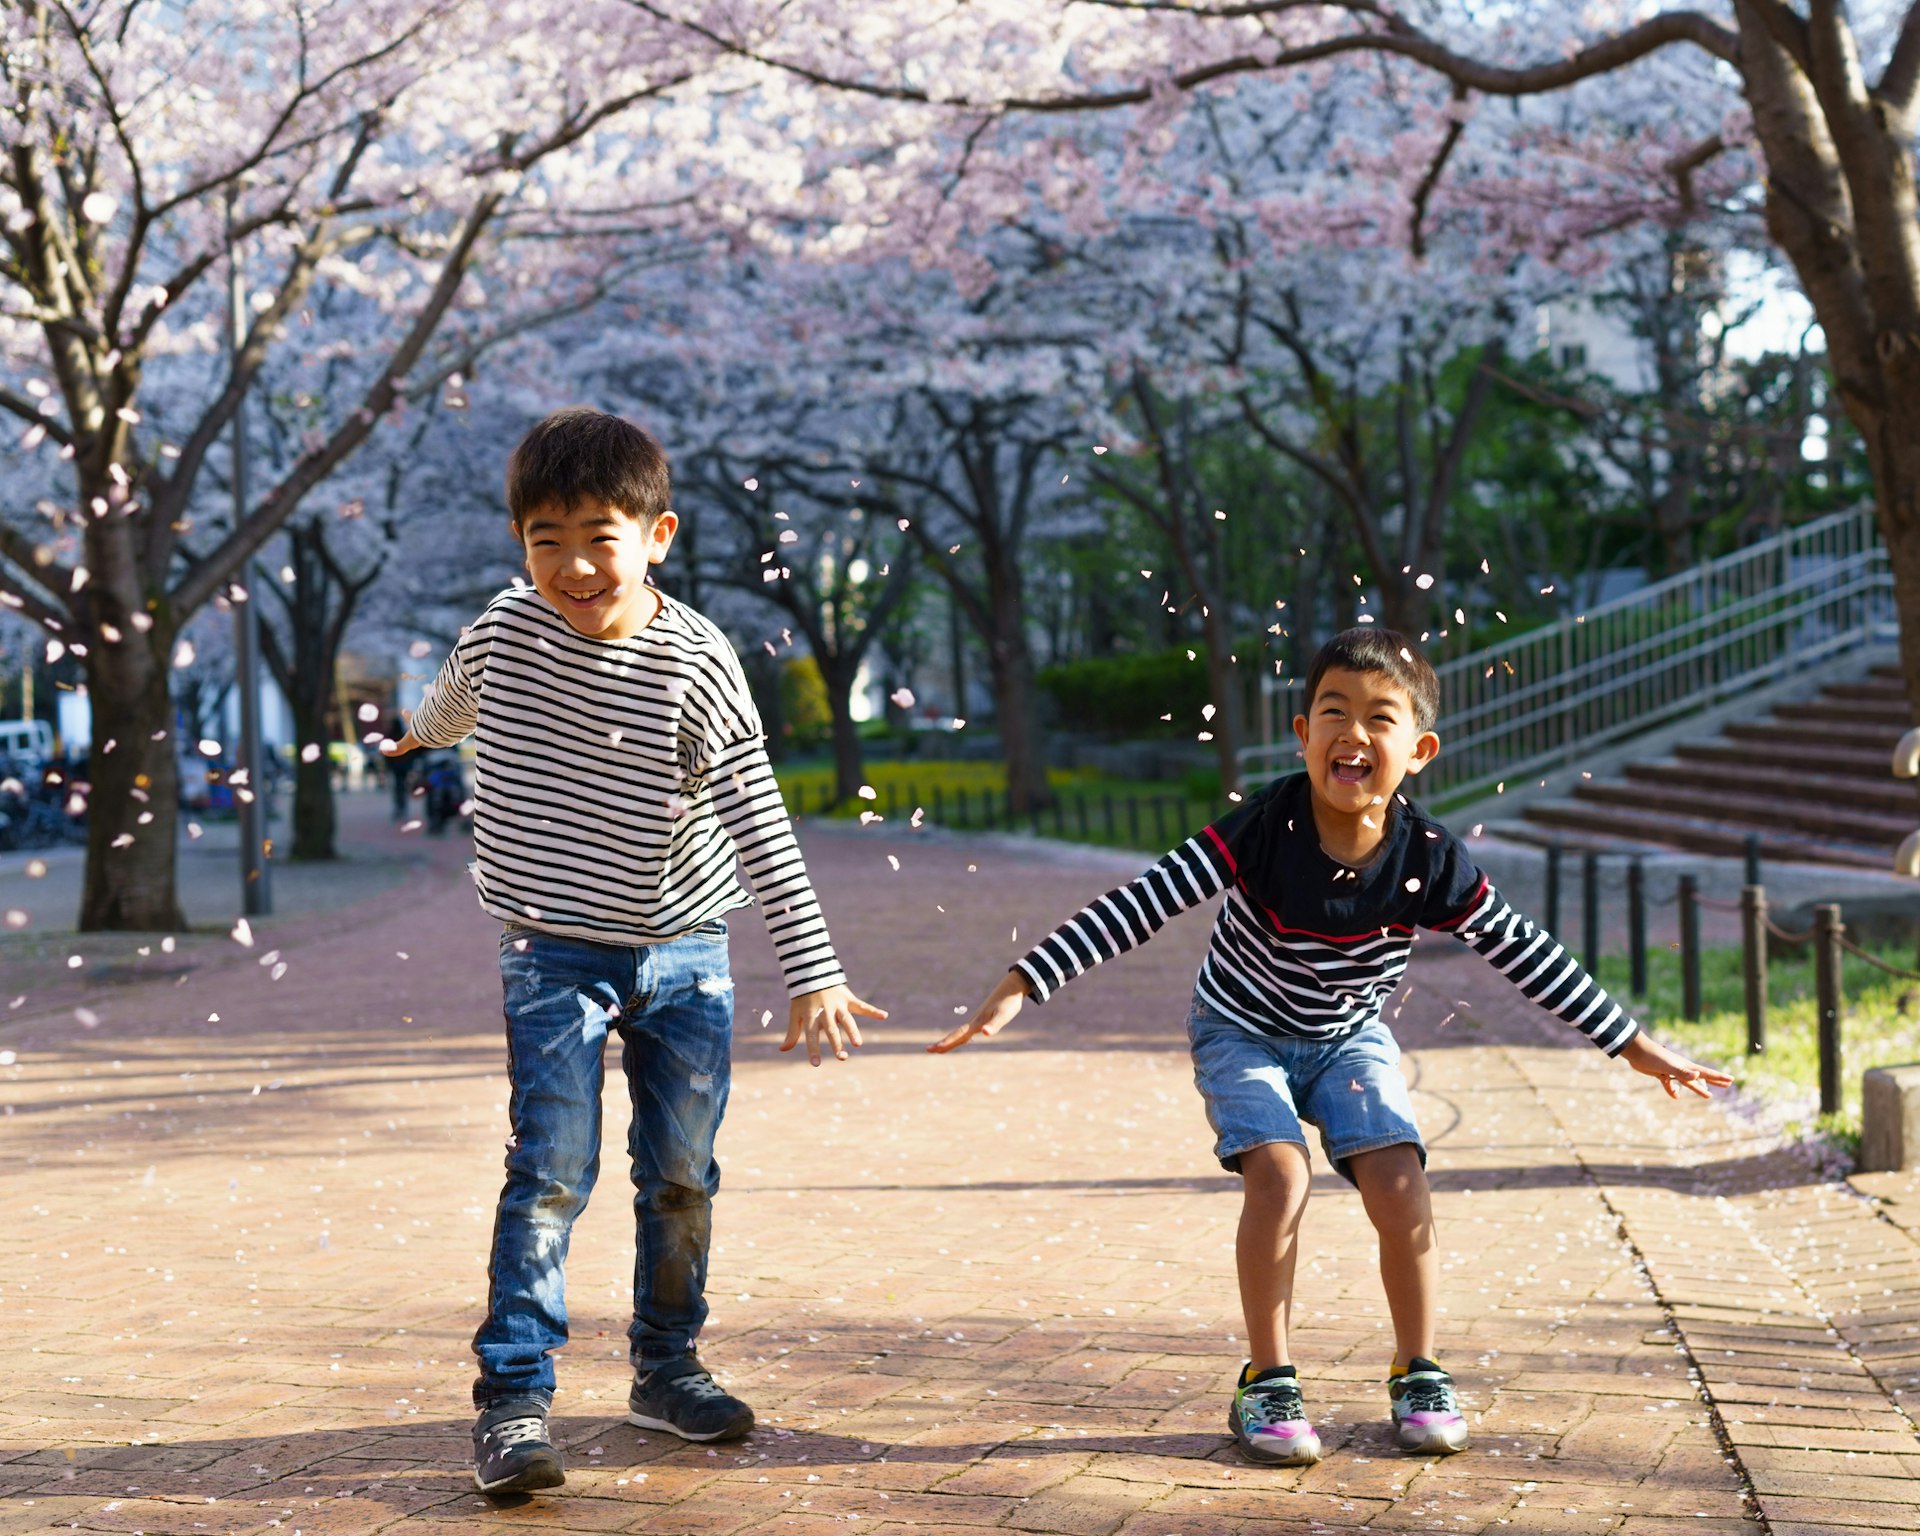 Boys playing in falling blossom in a park and laughing